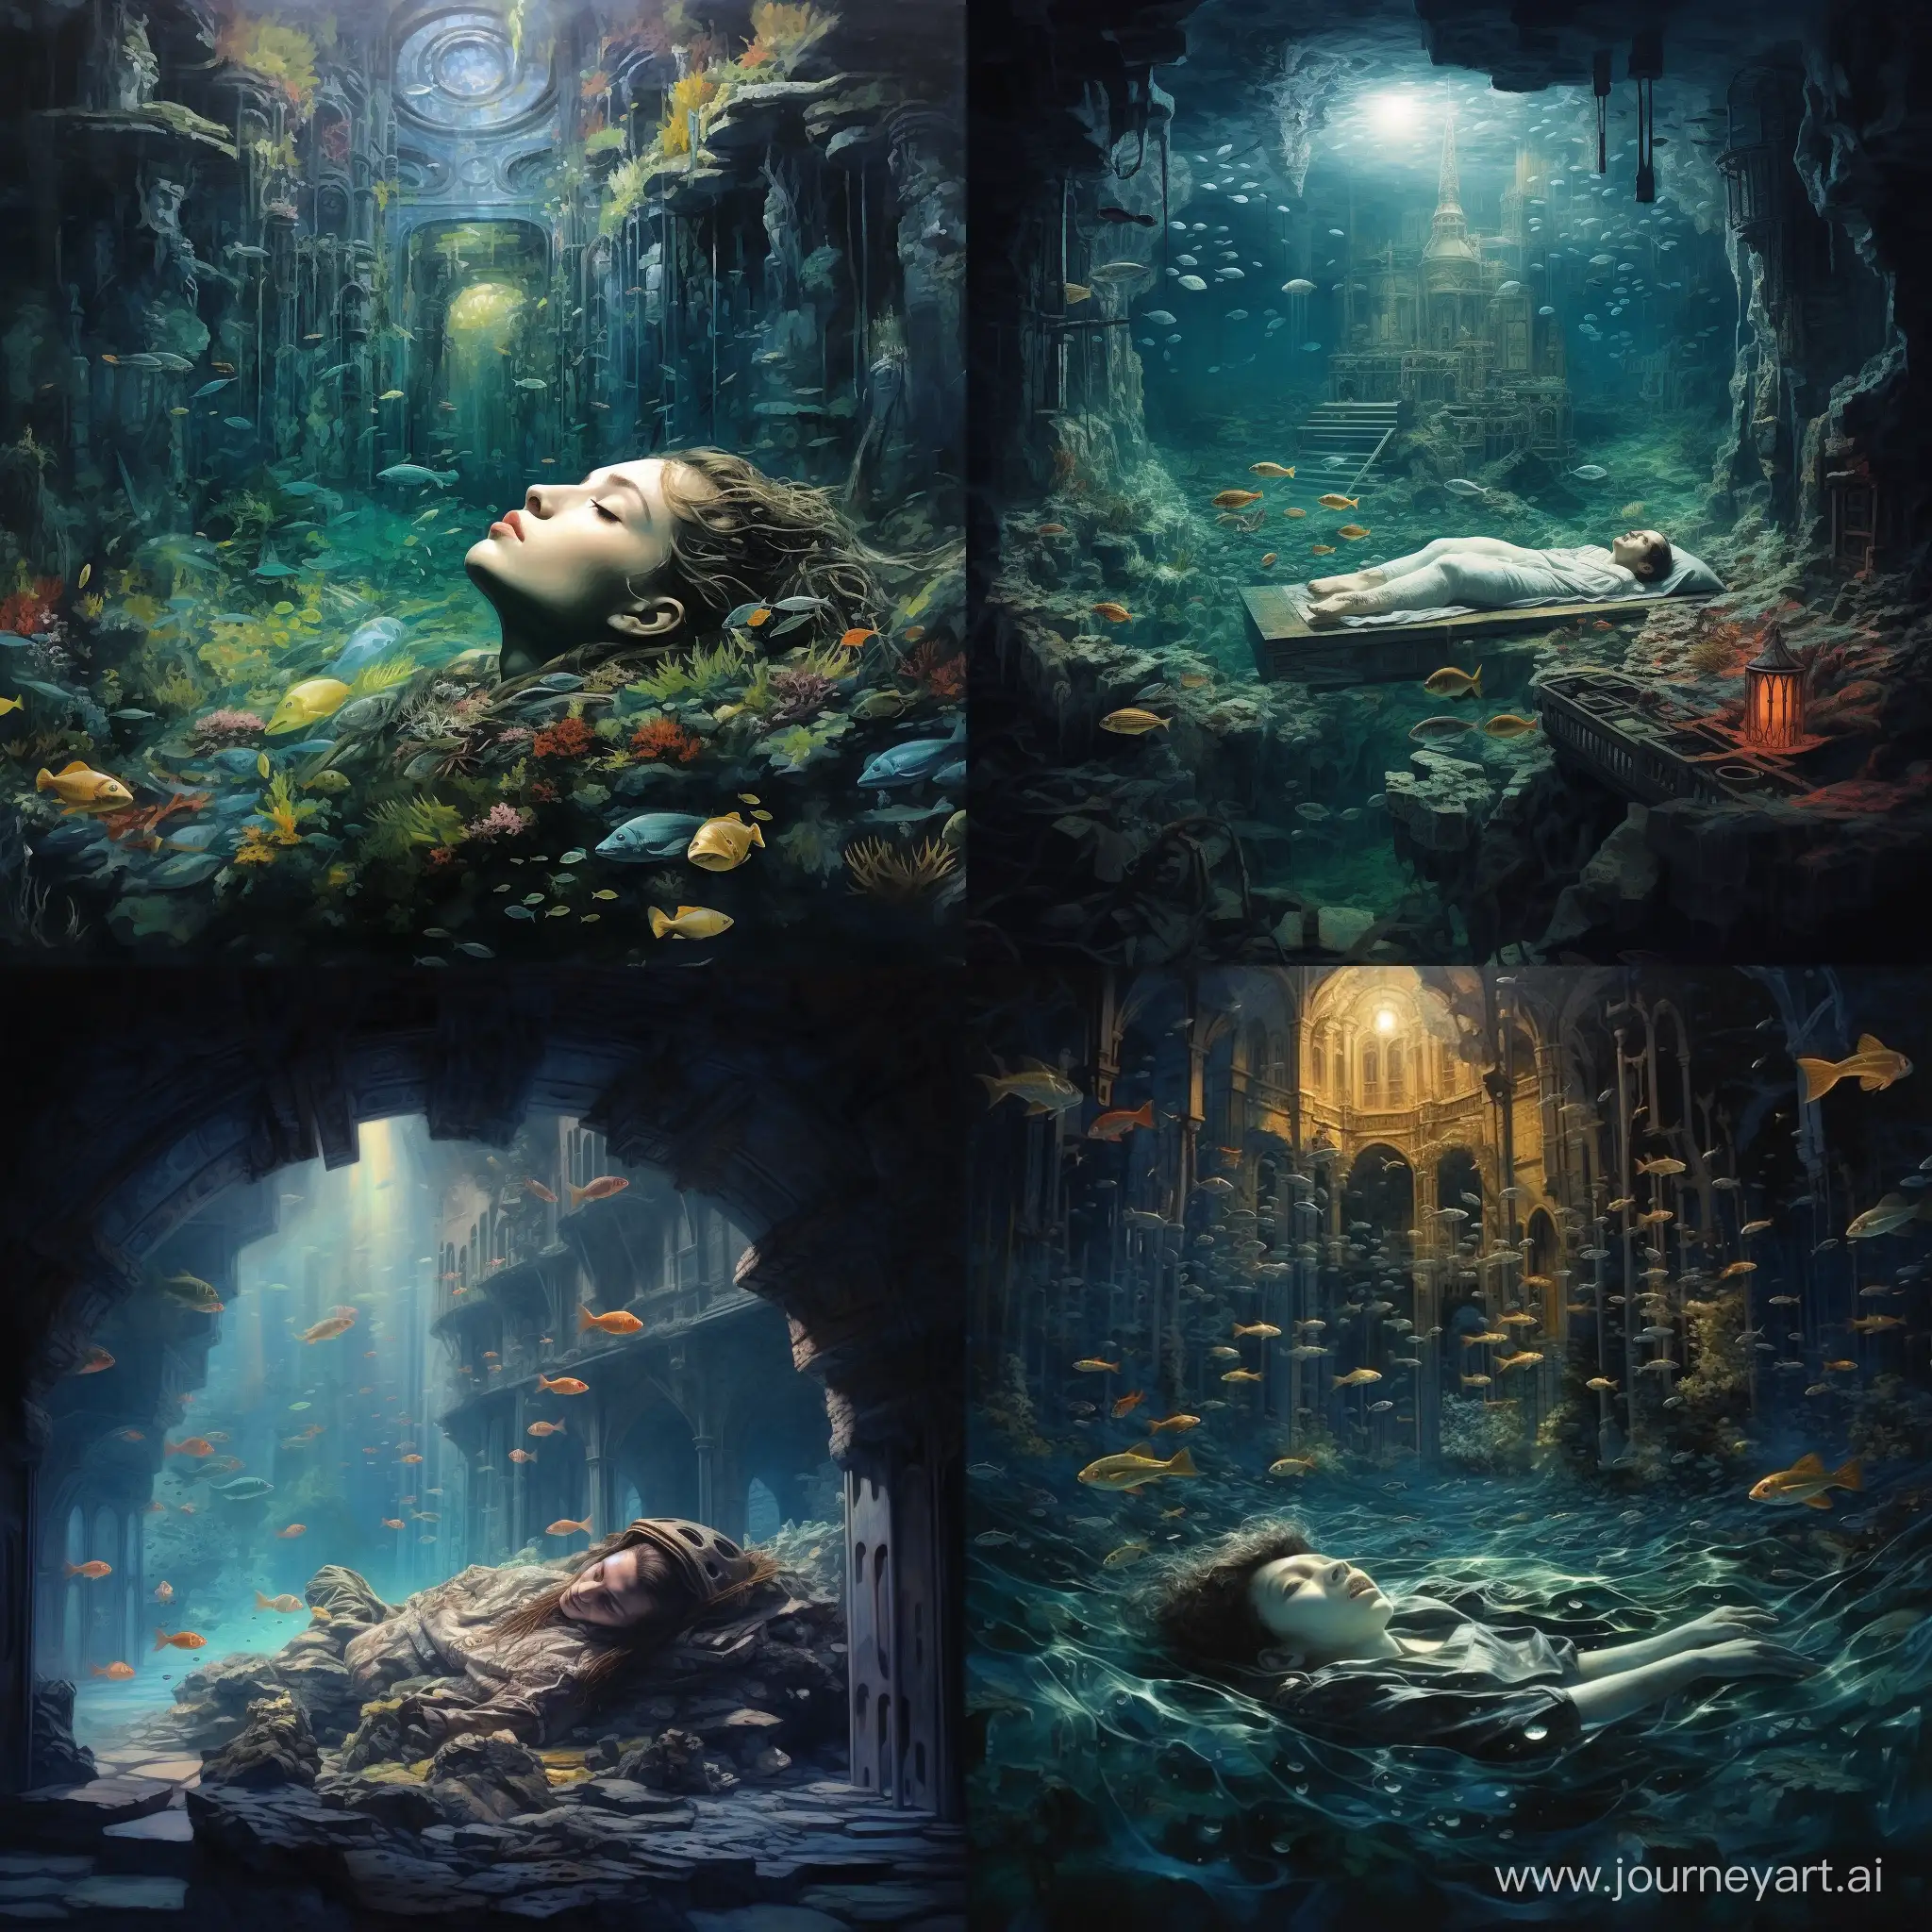 Magical-Dreams-of-Sleeping-Underwater-in-an-Ancient-Mythical-City